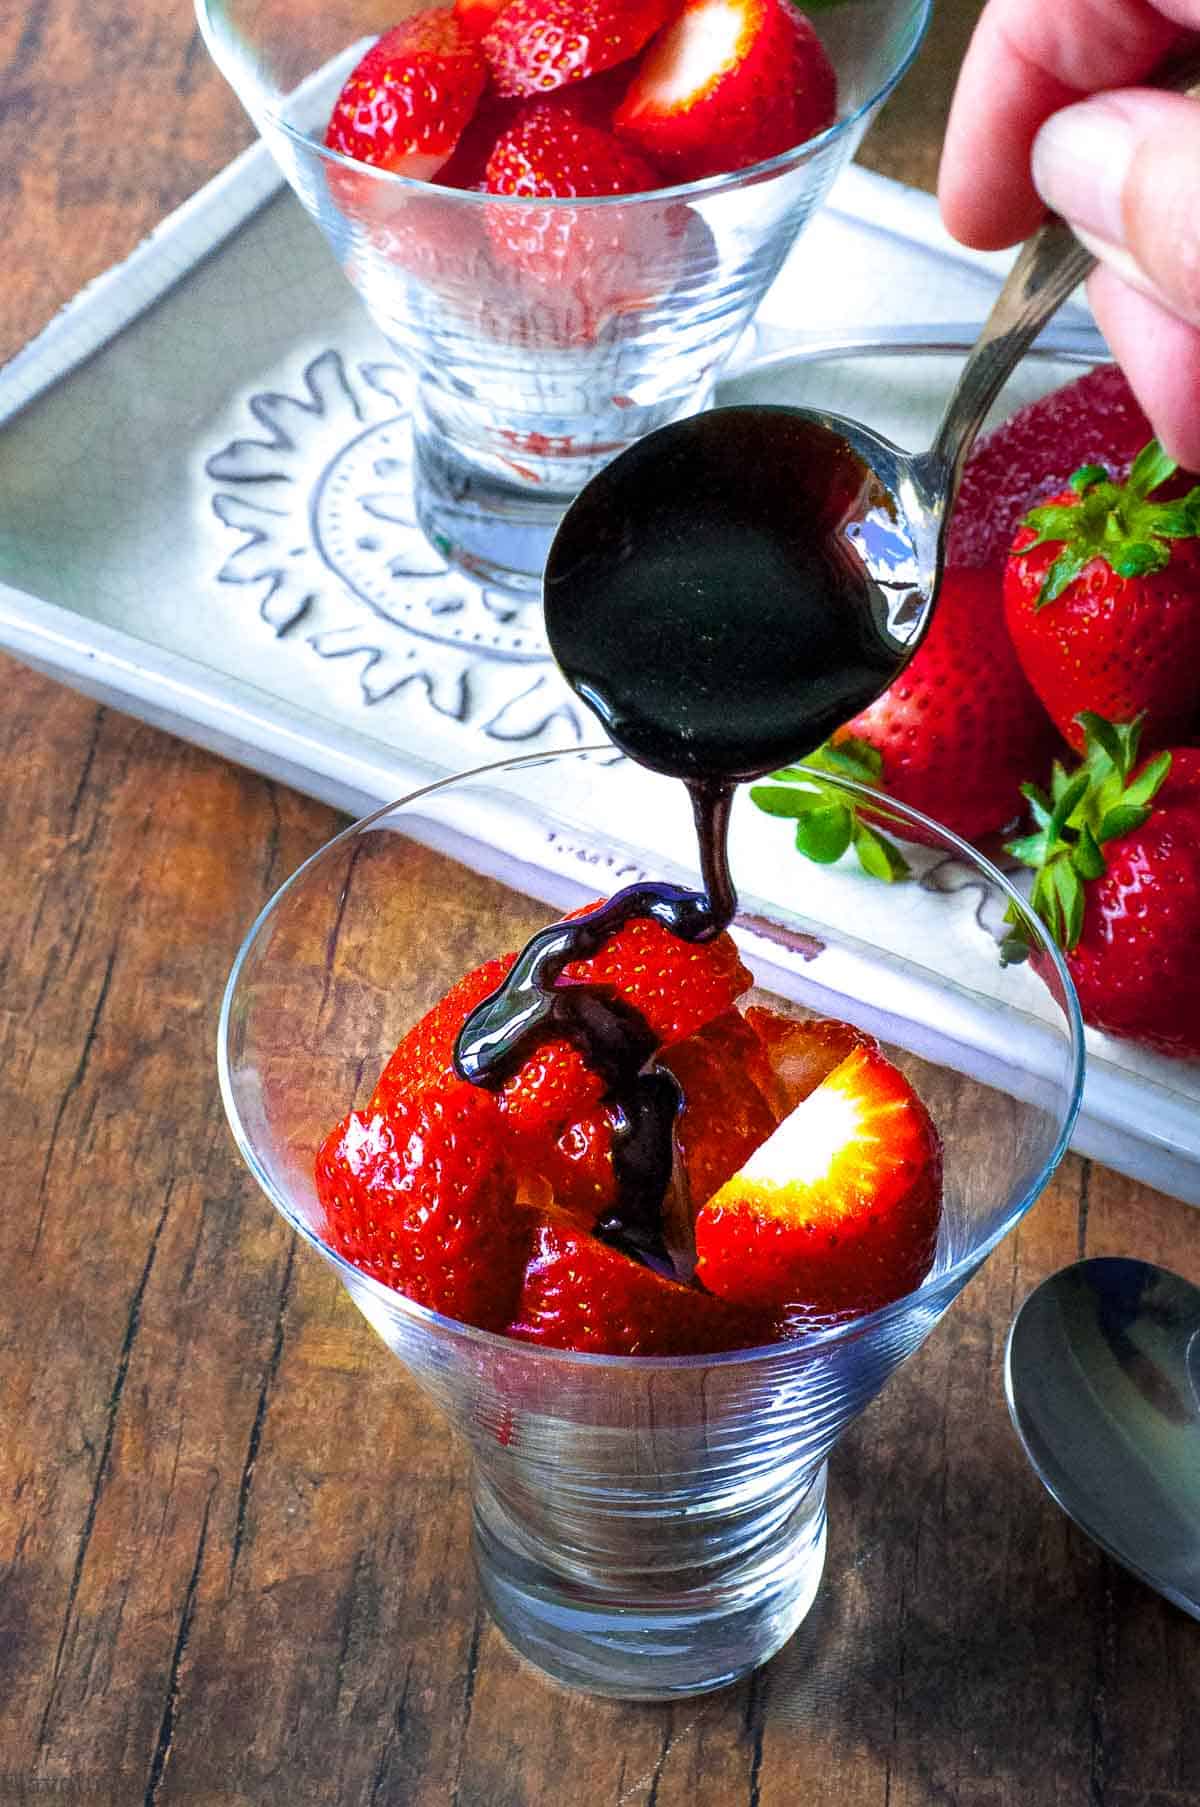 Drizzling balsamic glaze on strawberries in a glass dessert dish.